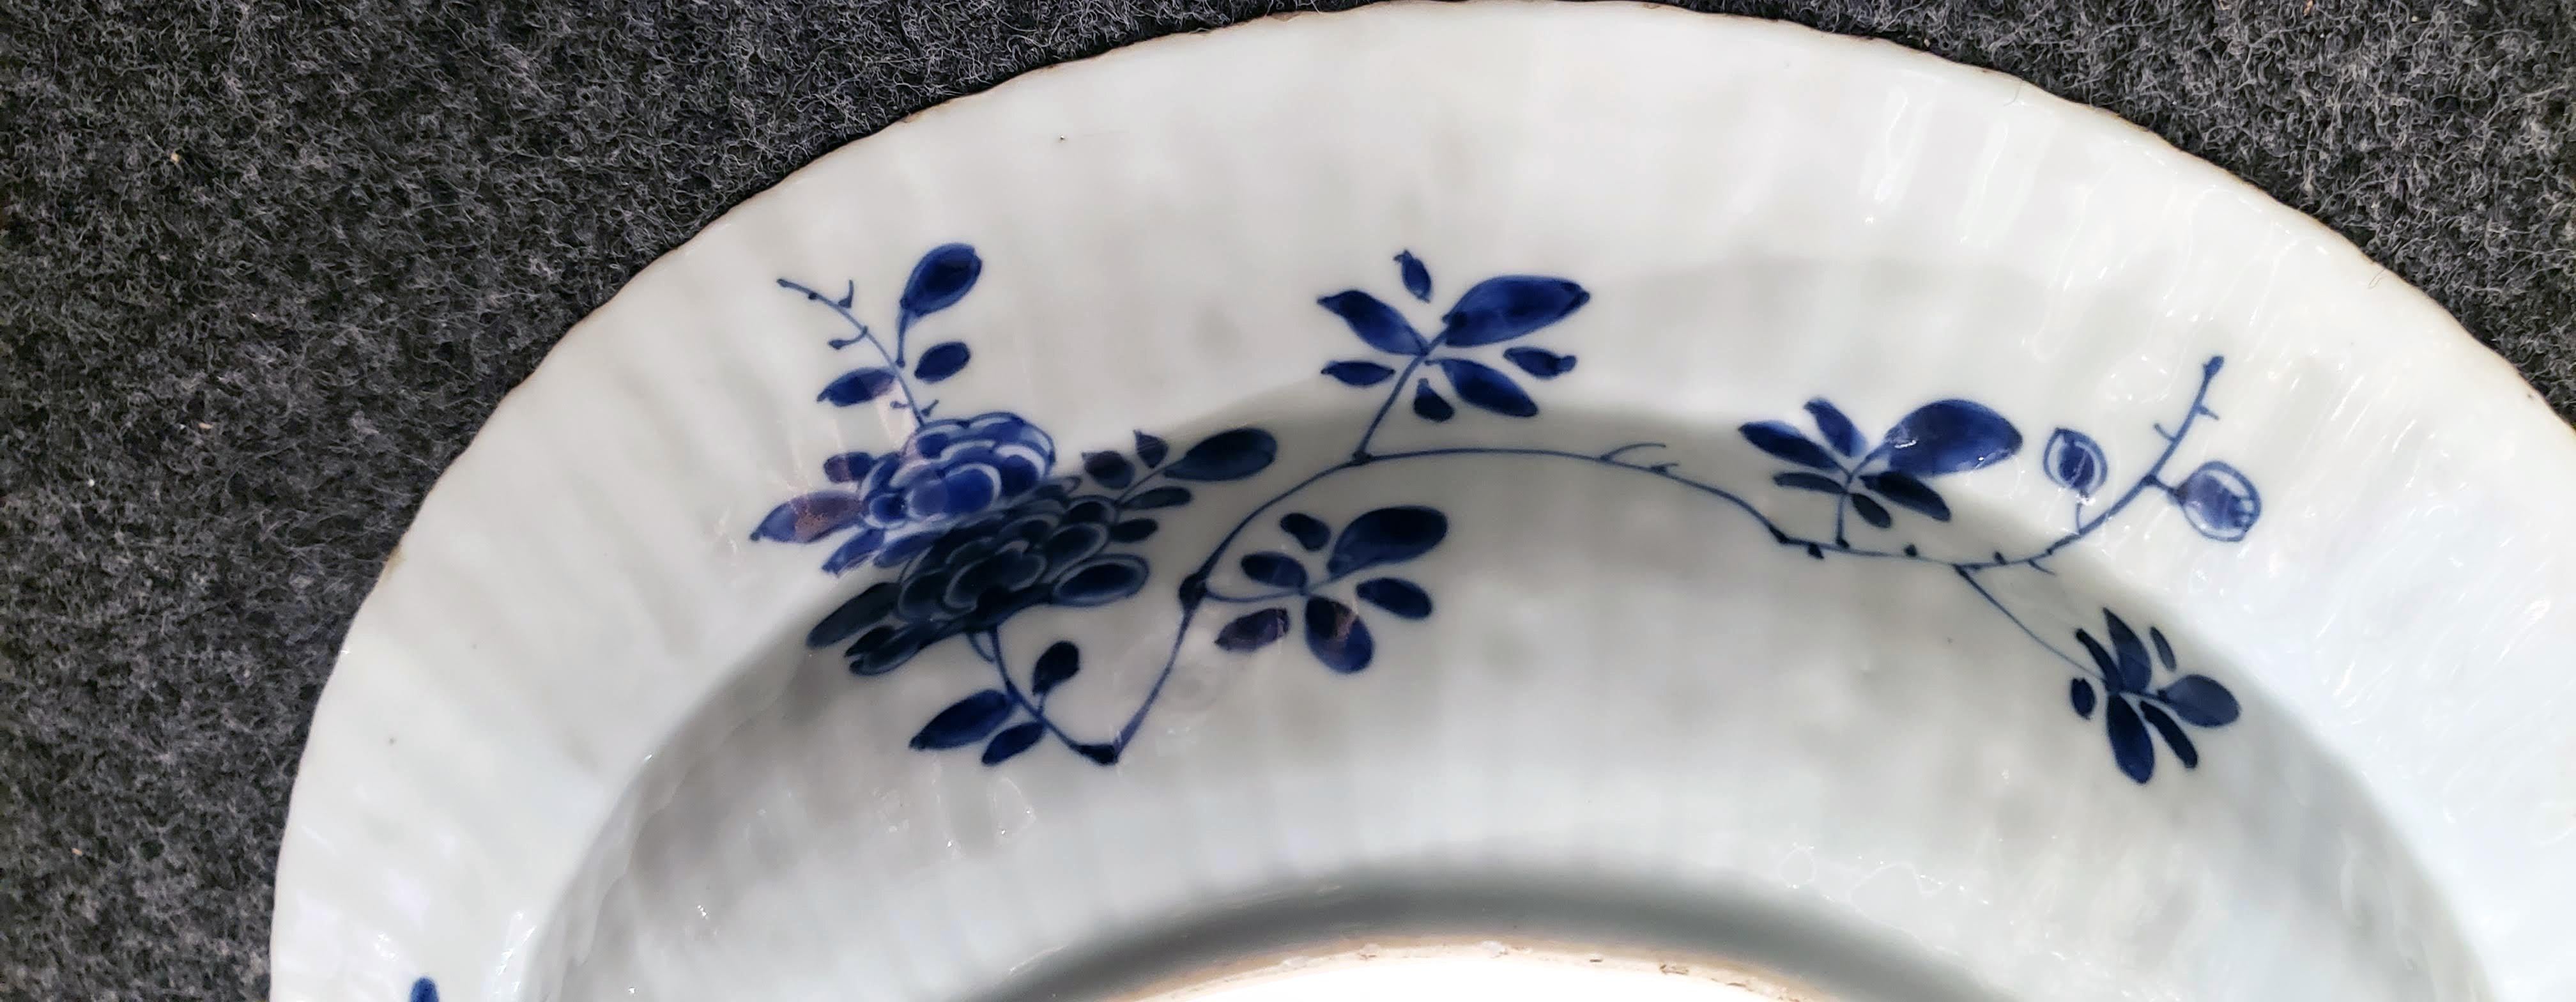 Kangxi period Chinese underglaze blue moulded basin,
circa 1700-1710.
(VM98339).

The deep Chinese underglaze blue porcelain basin from the Kangxi period has a moulded fluted ribbed body with the wide rim with twelve painted lotus leaf-shaped